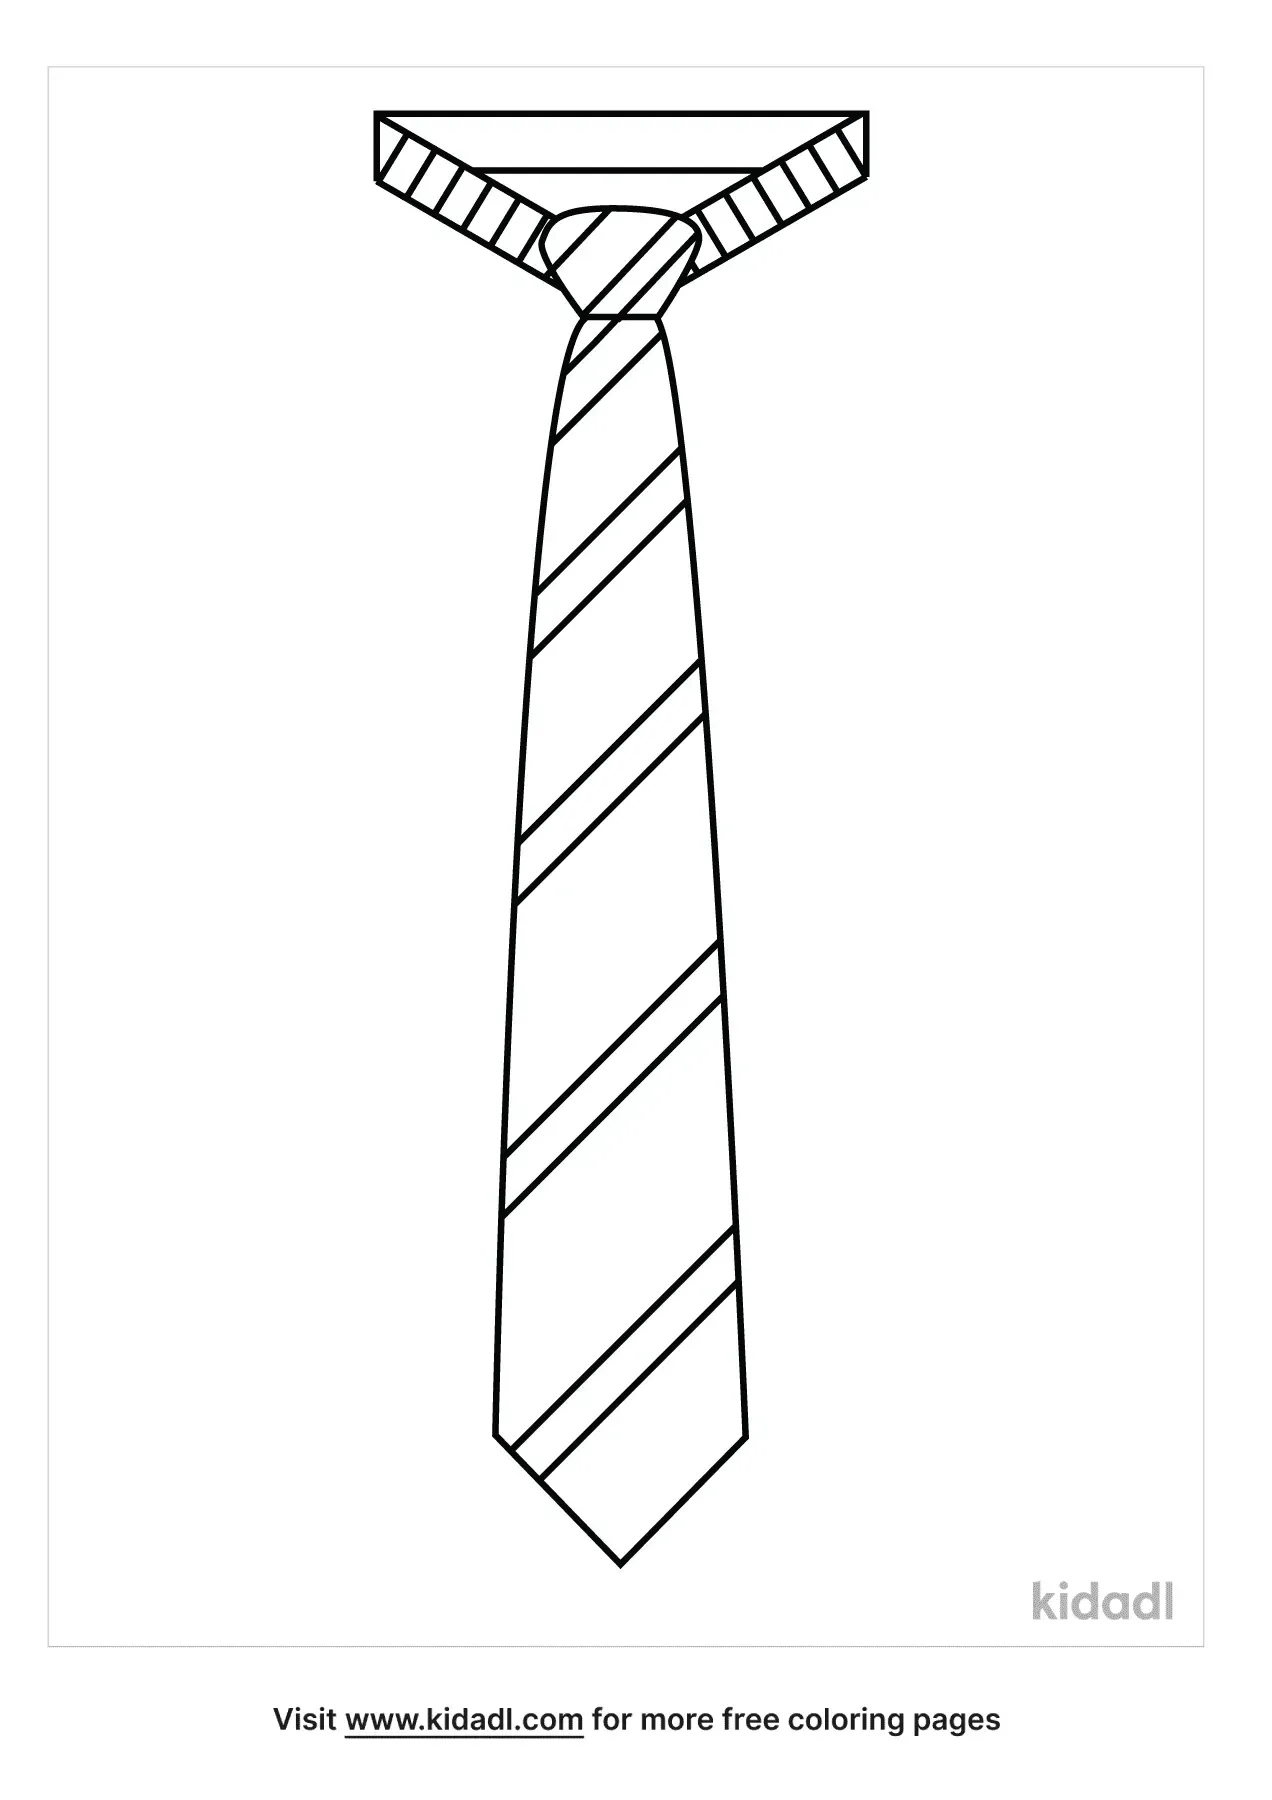 Free Striped Tie Coloring Page Coloring Page Printables Kidadl